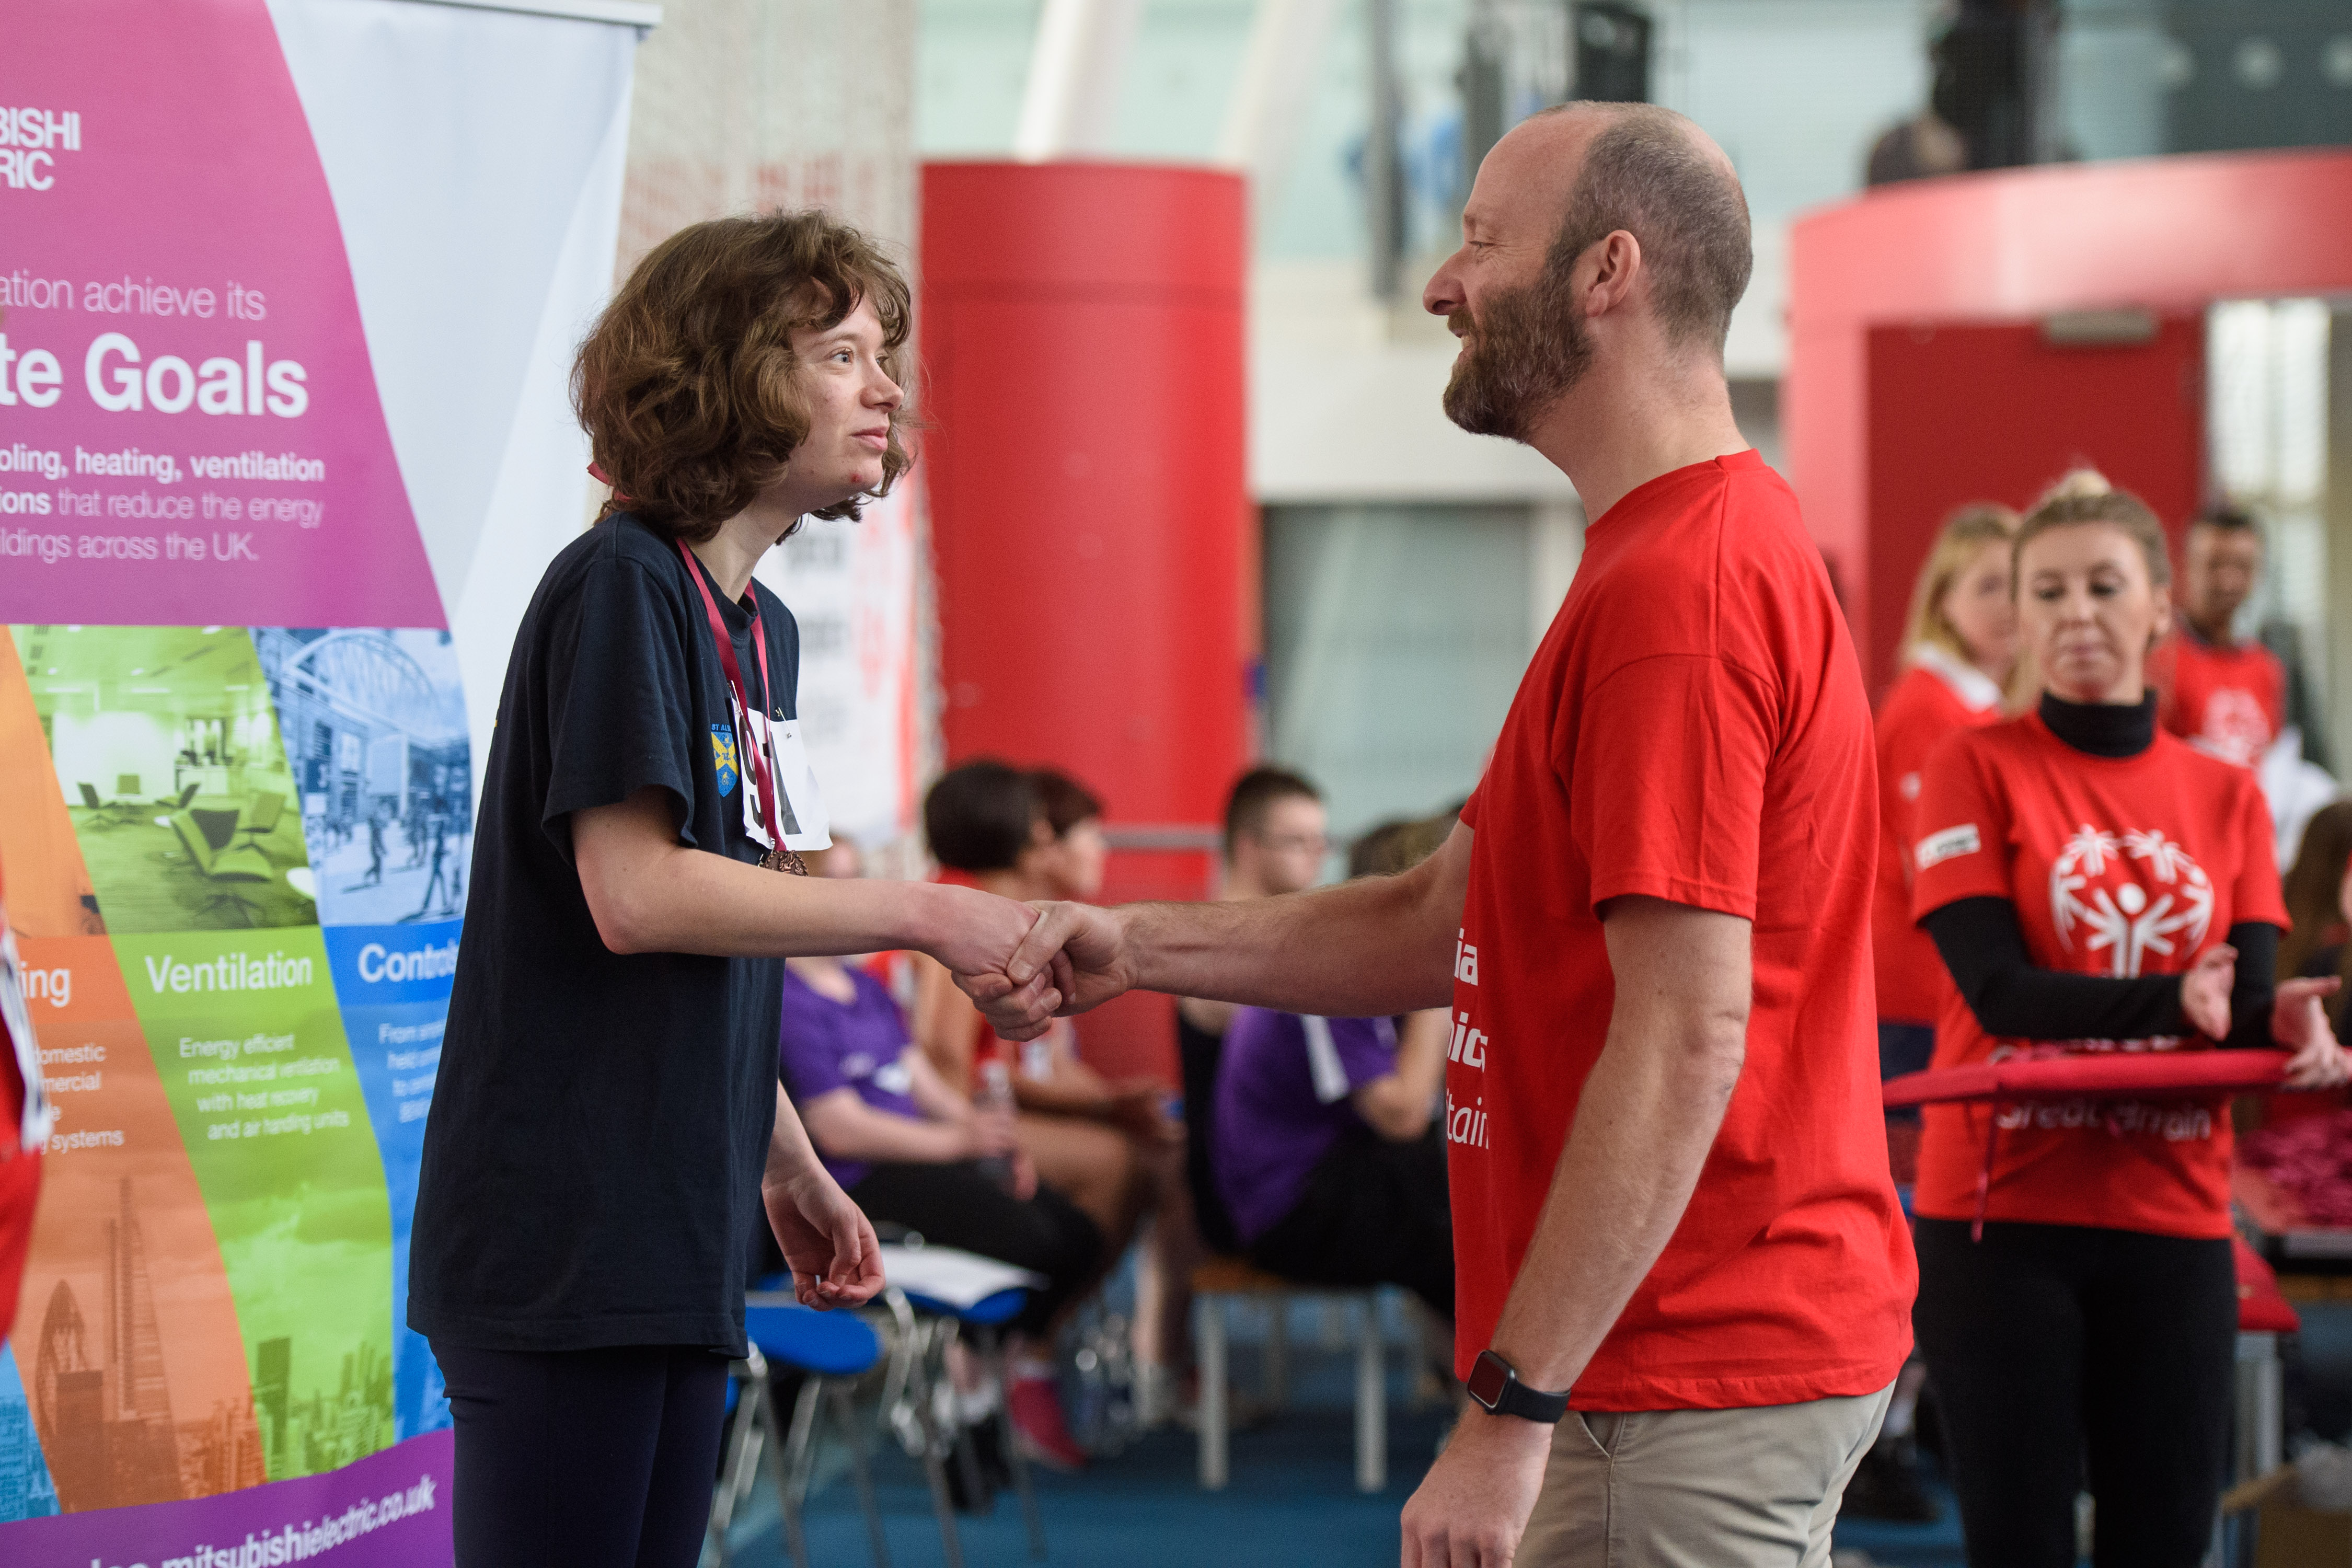 An official partner since 2018, Mitsubishi Electric has been active in supporting a wide variety of Special Olympics GB events. [Source: Special Olympics GB]